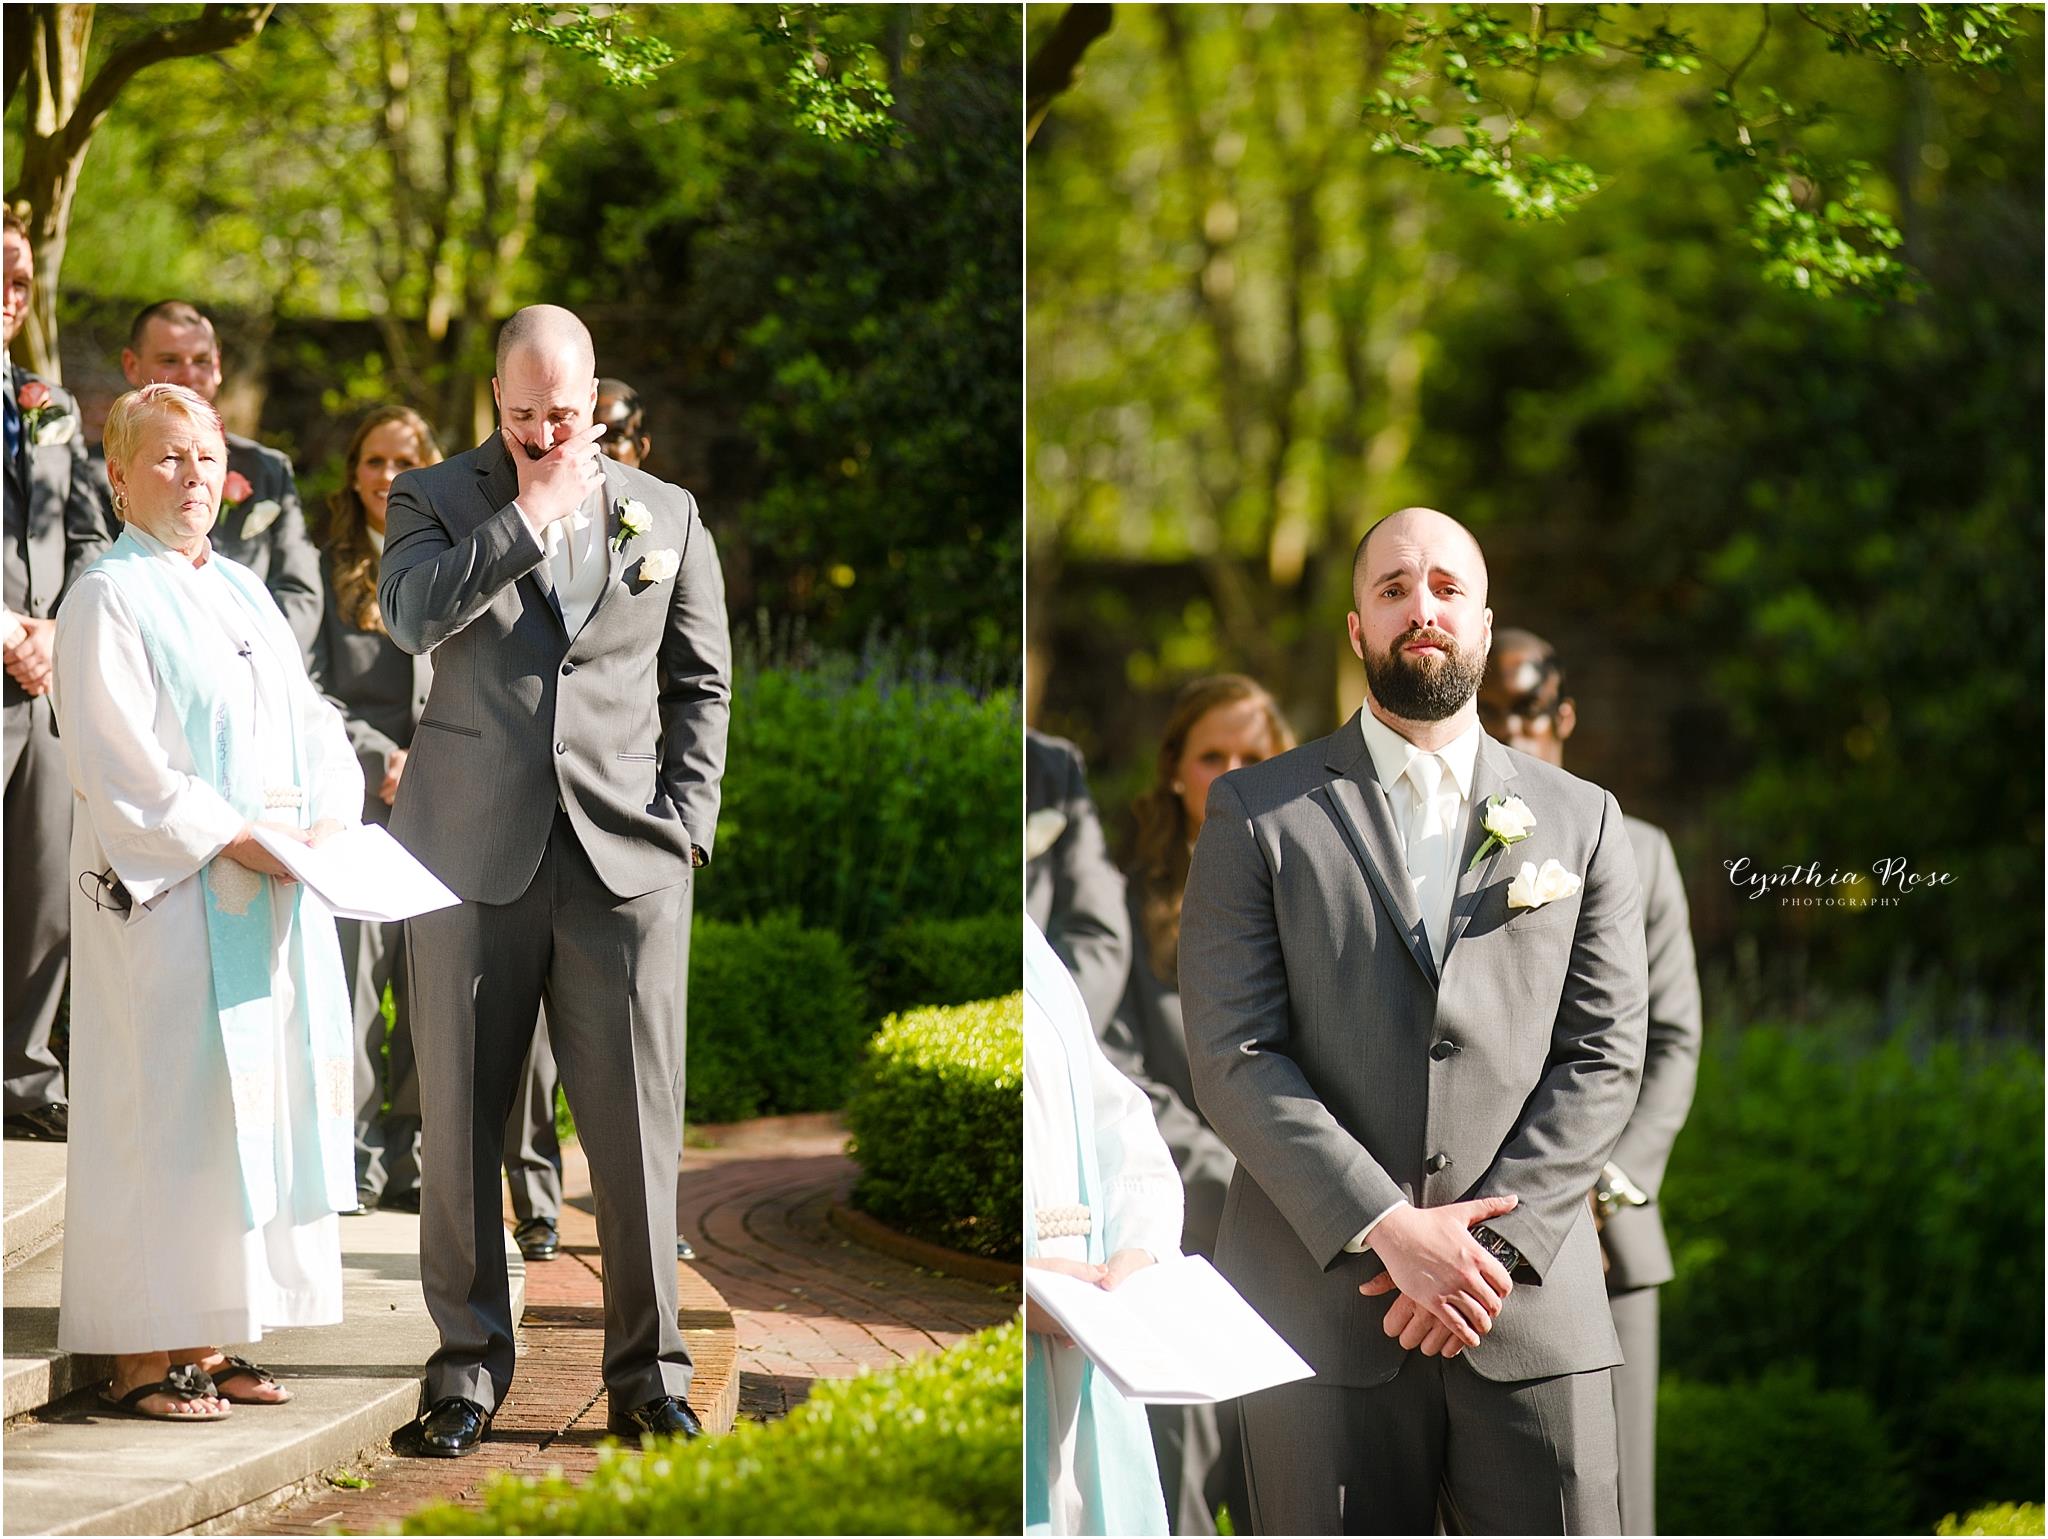 grooms-reaction-seeing-bride-for-the-first-time-priceless-tryon-palace-latham-garden-wedding-ceremony-new-bern